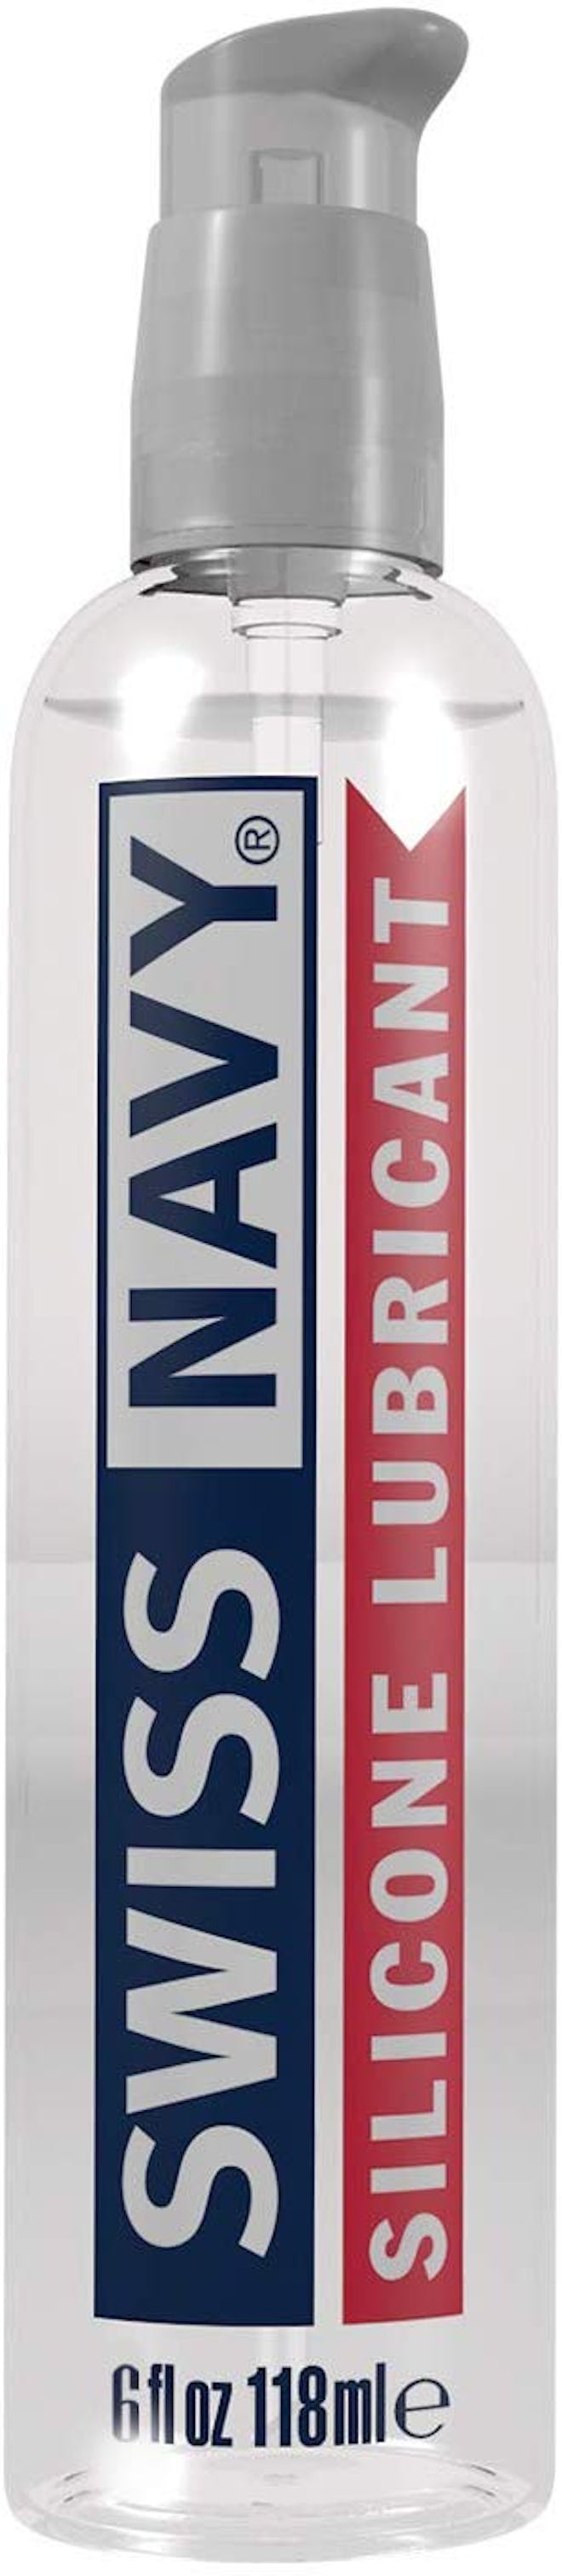 Swiss Navy Personal Lubricant Silicone